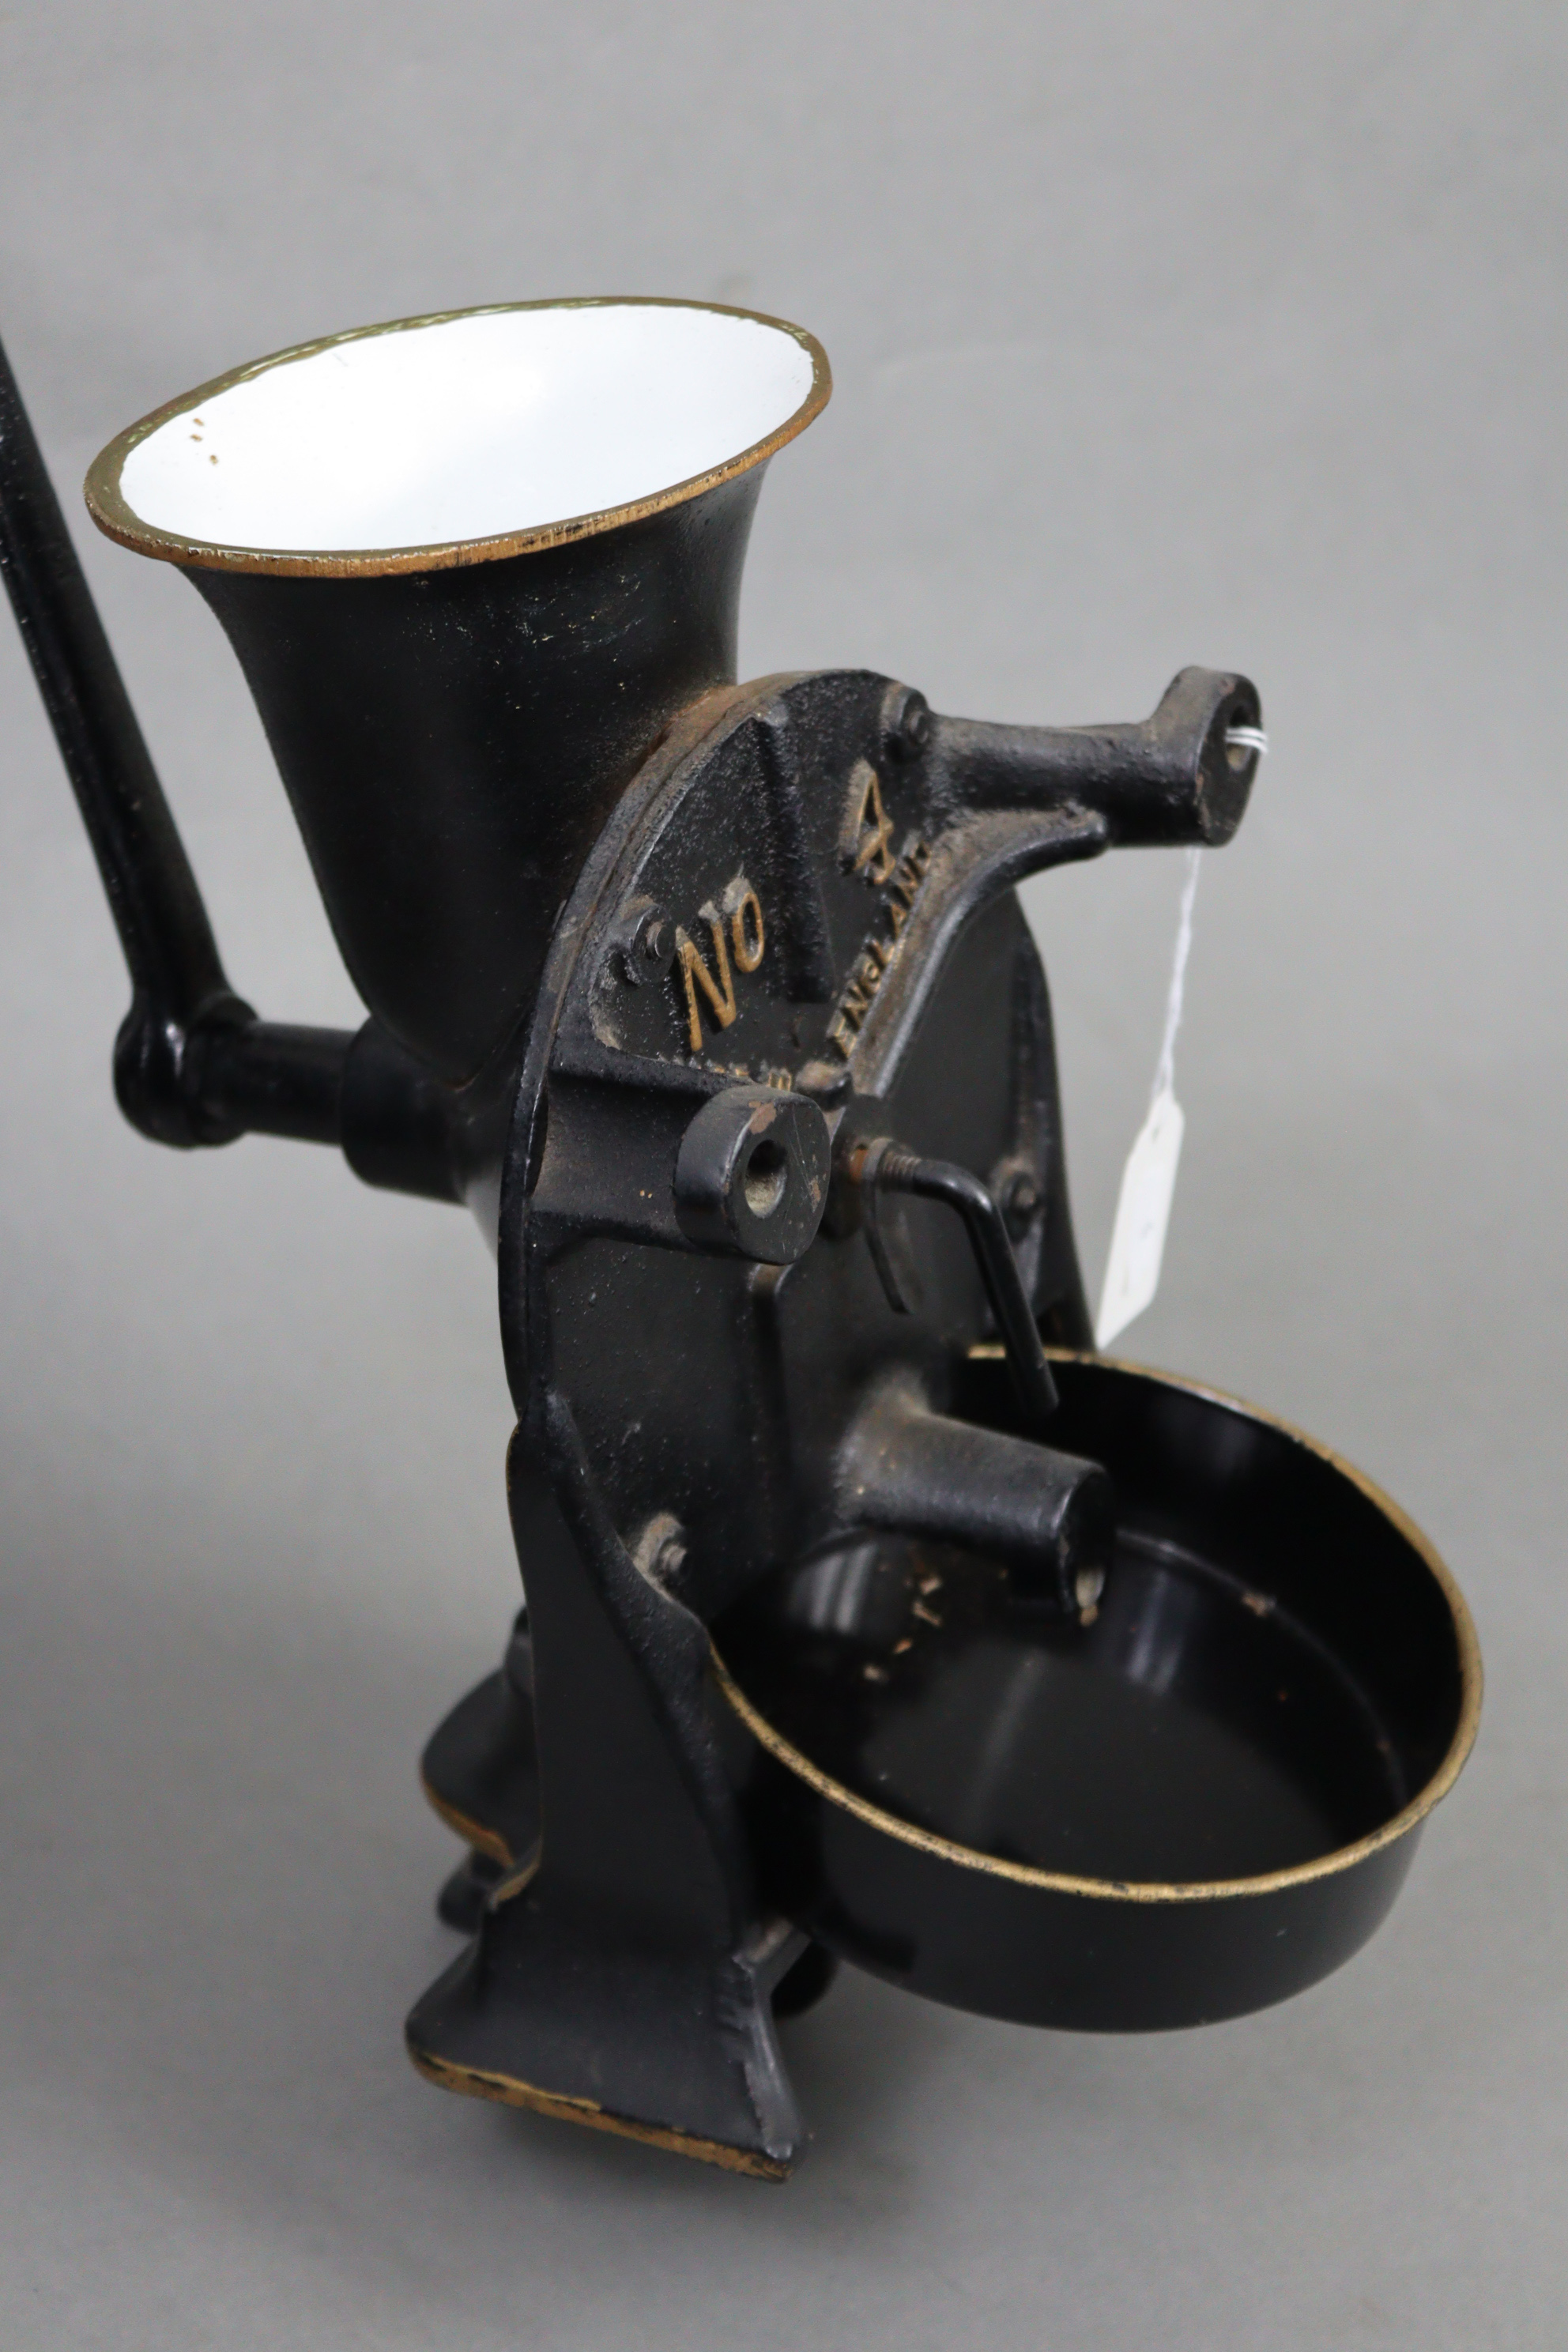 A vintage Spong & Co. Ltd. black & gold painted cast-iron coffee grinder (No. 4), complete with - Image 2 of 3